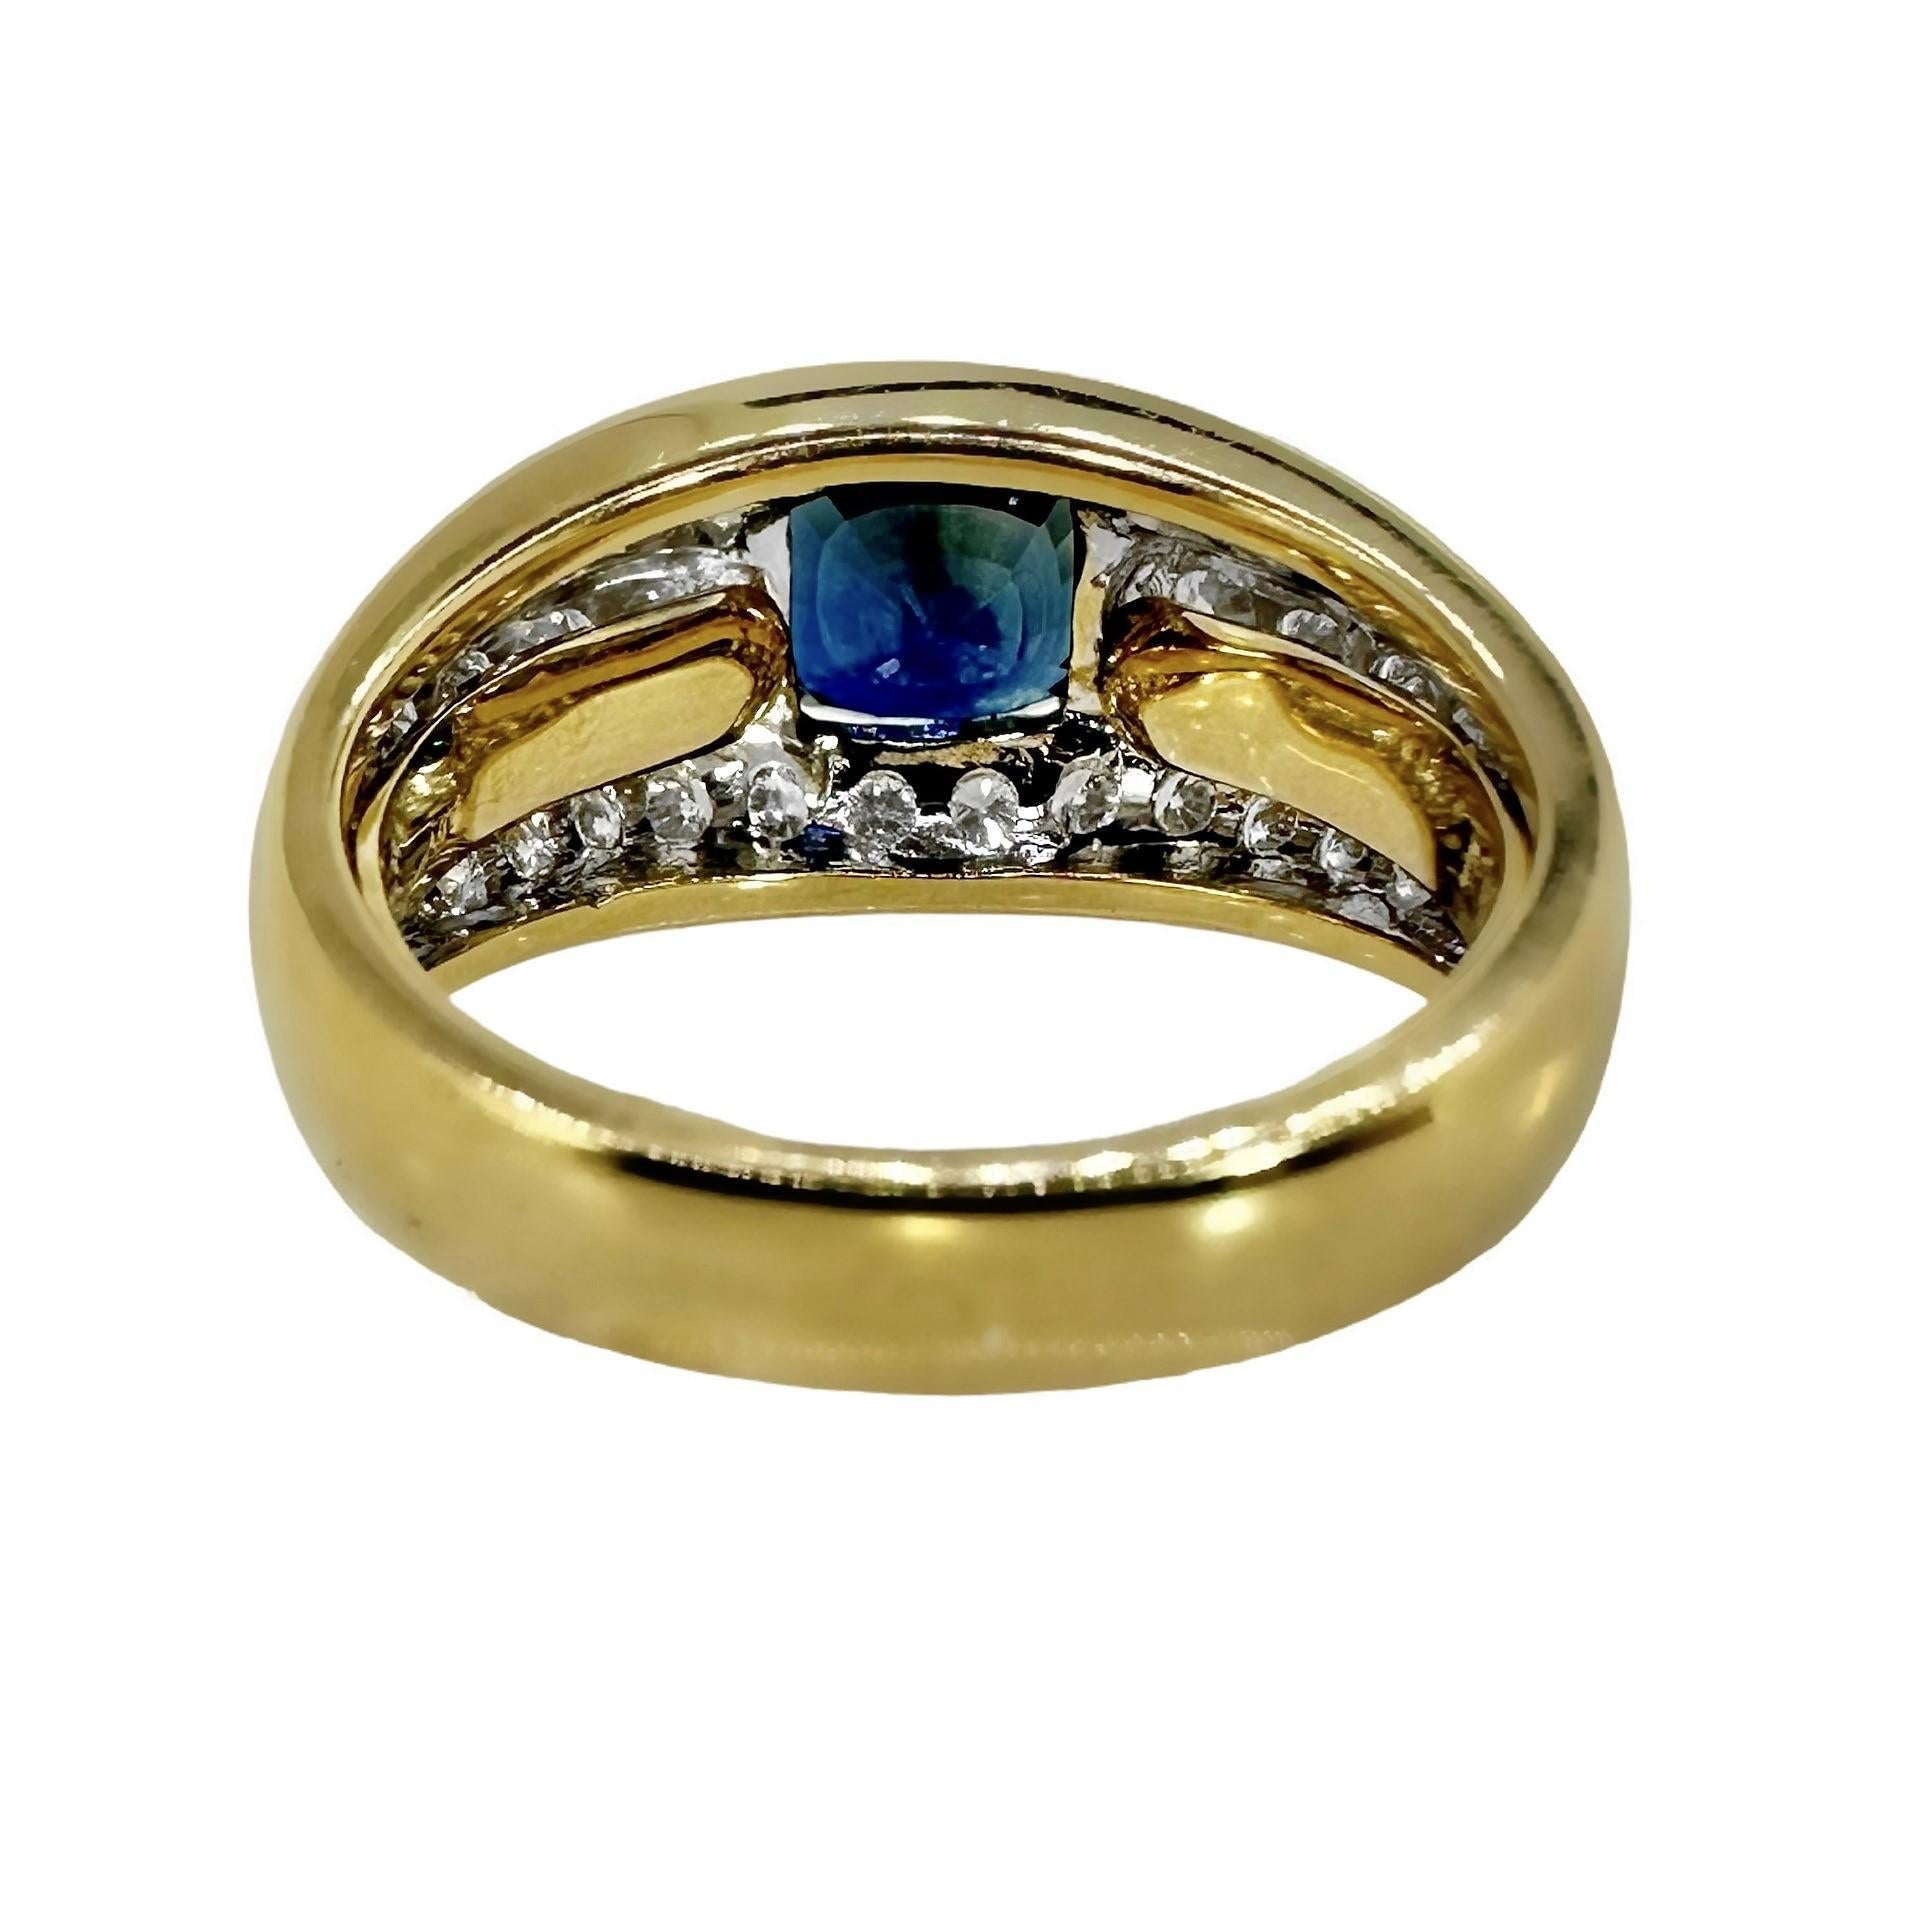 Modern Mid-20th Century 18k Yellow Gold Cocktail Ring with 2.67Ct Sapphire & Diamonds For Sale